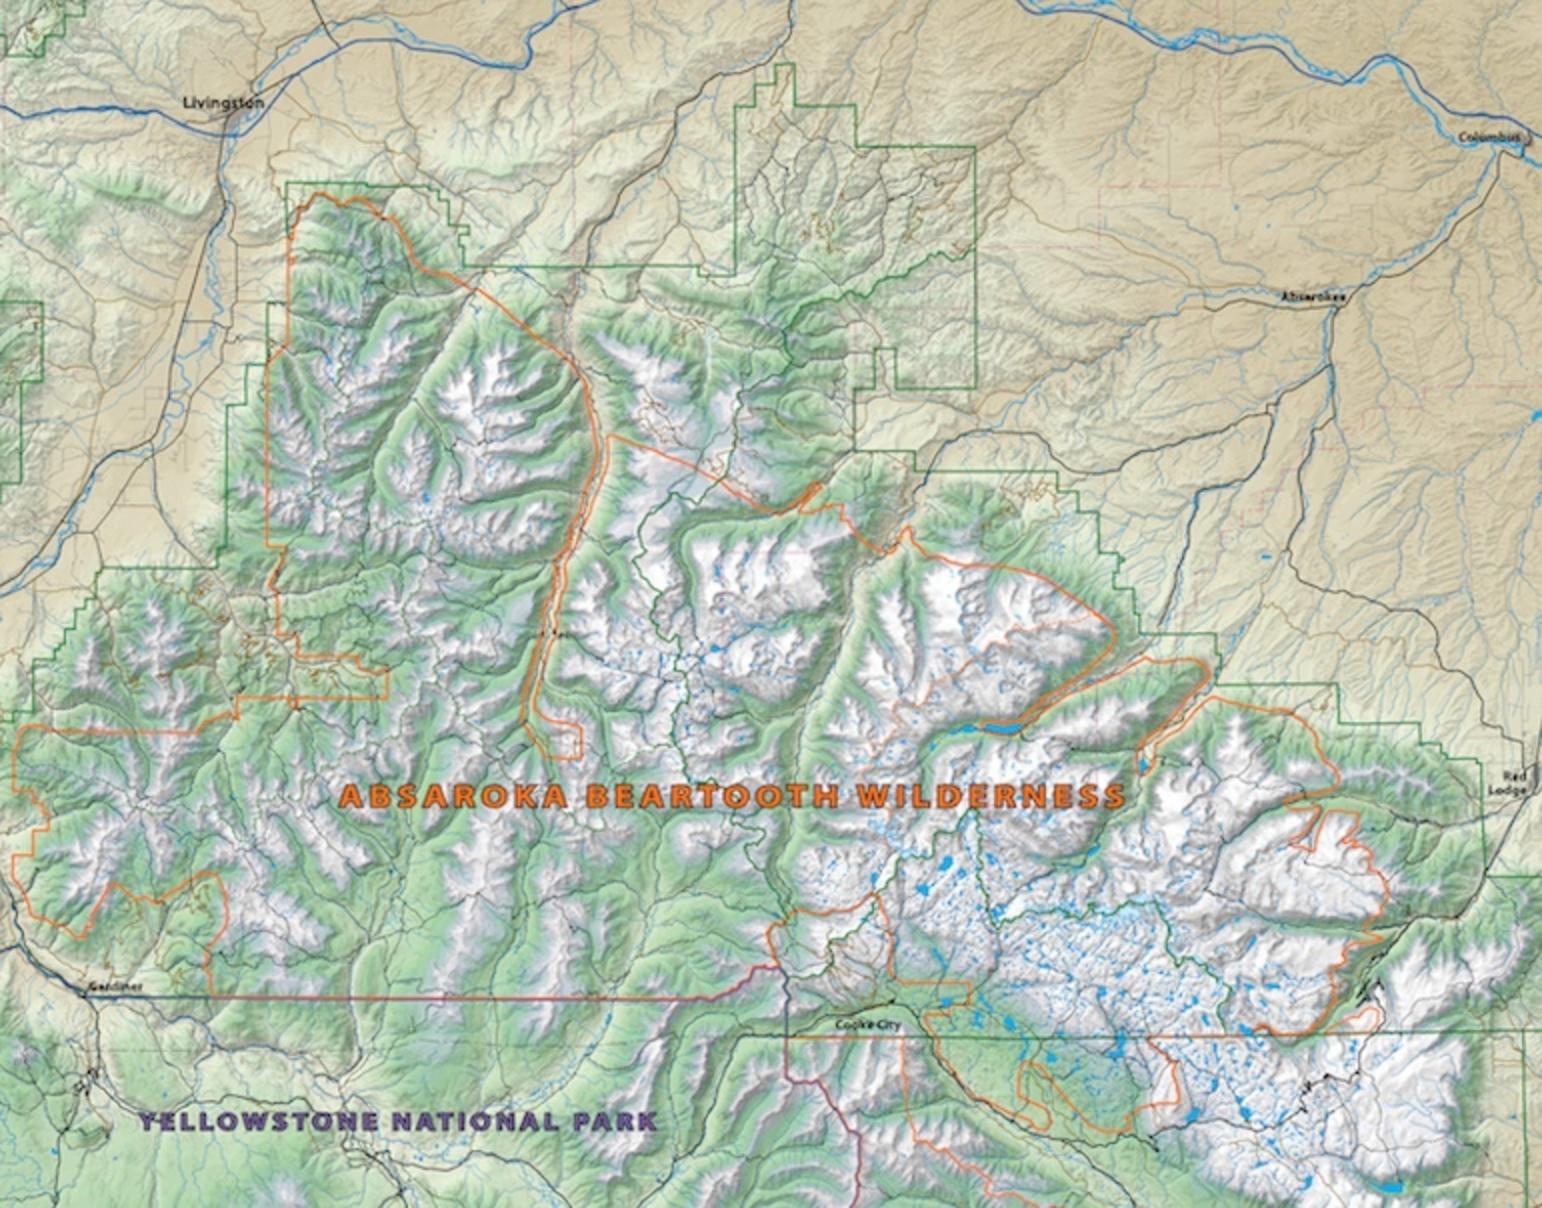 The Absaroka-Beartooth Wilderness is not only important habitat for wildlife and popular among recreationists, it helps protect the wild character of Yellowstone National Park. Many say the same kind of courage and vision that went into creating the A-B needs to be applied to the wild crest of the Gallatin Mountains, whose ecological values are equally as important.  Map courtesy Beartooth Publishing (www.beartoothpublishing.com)